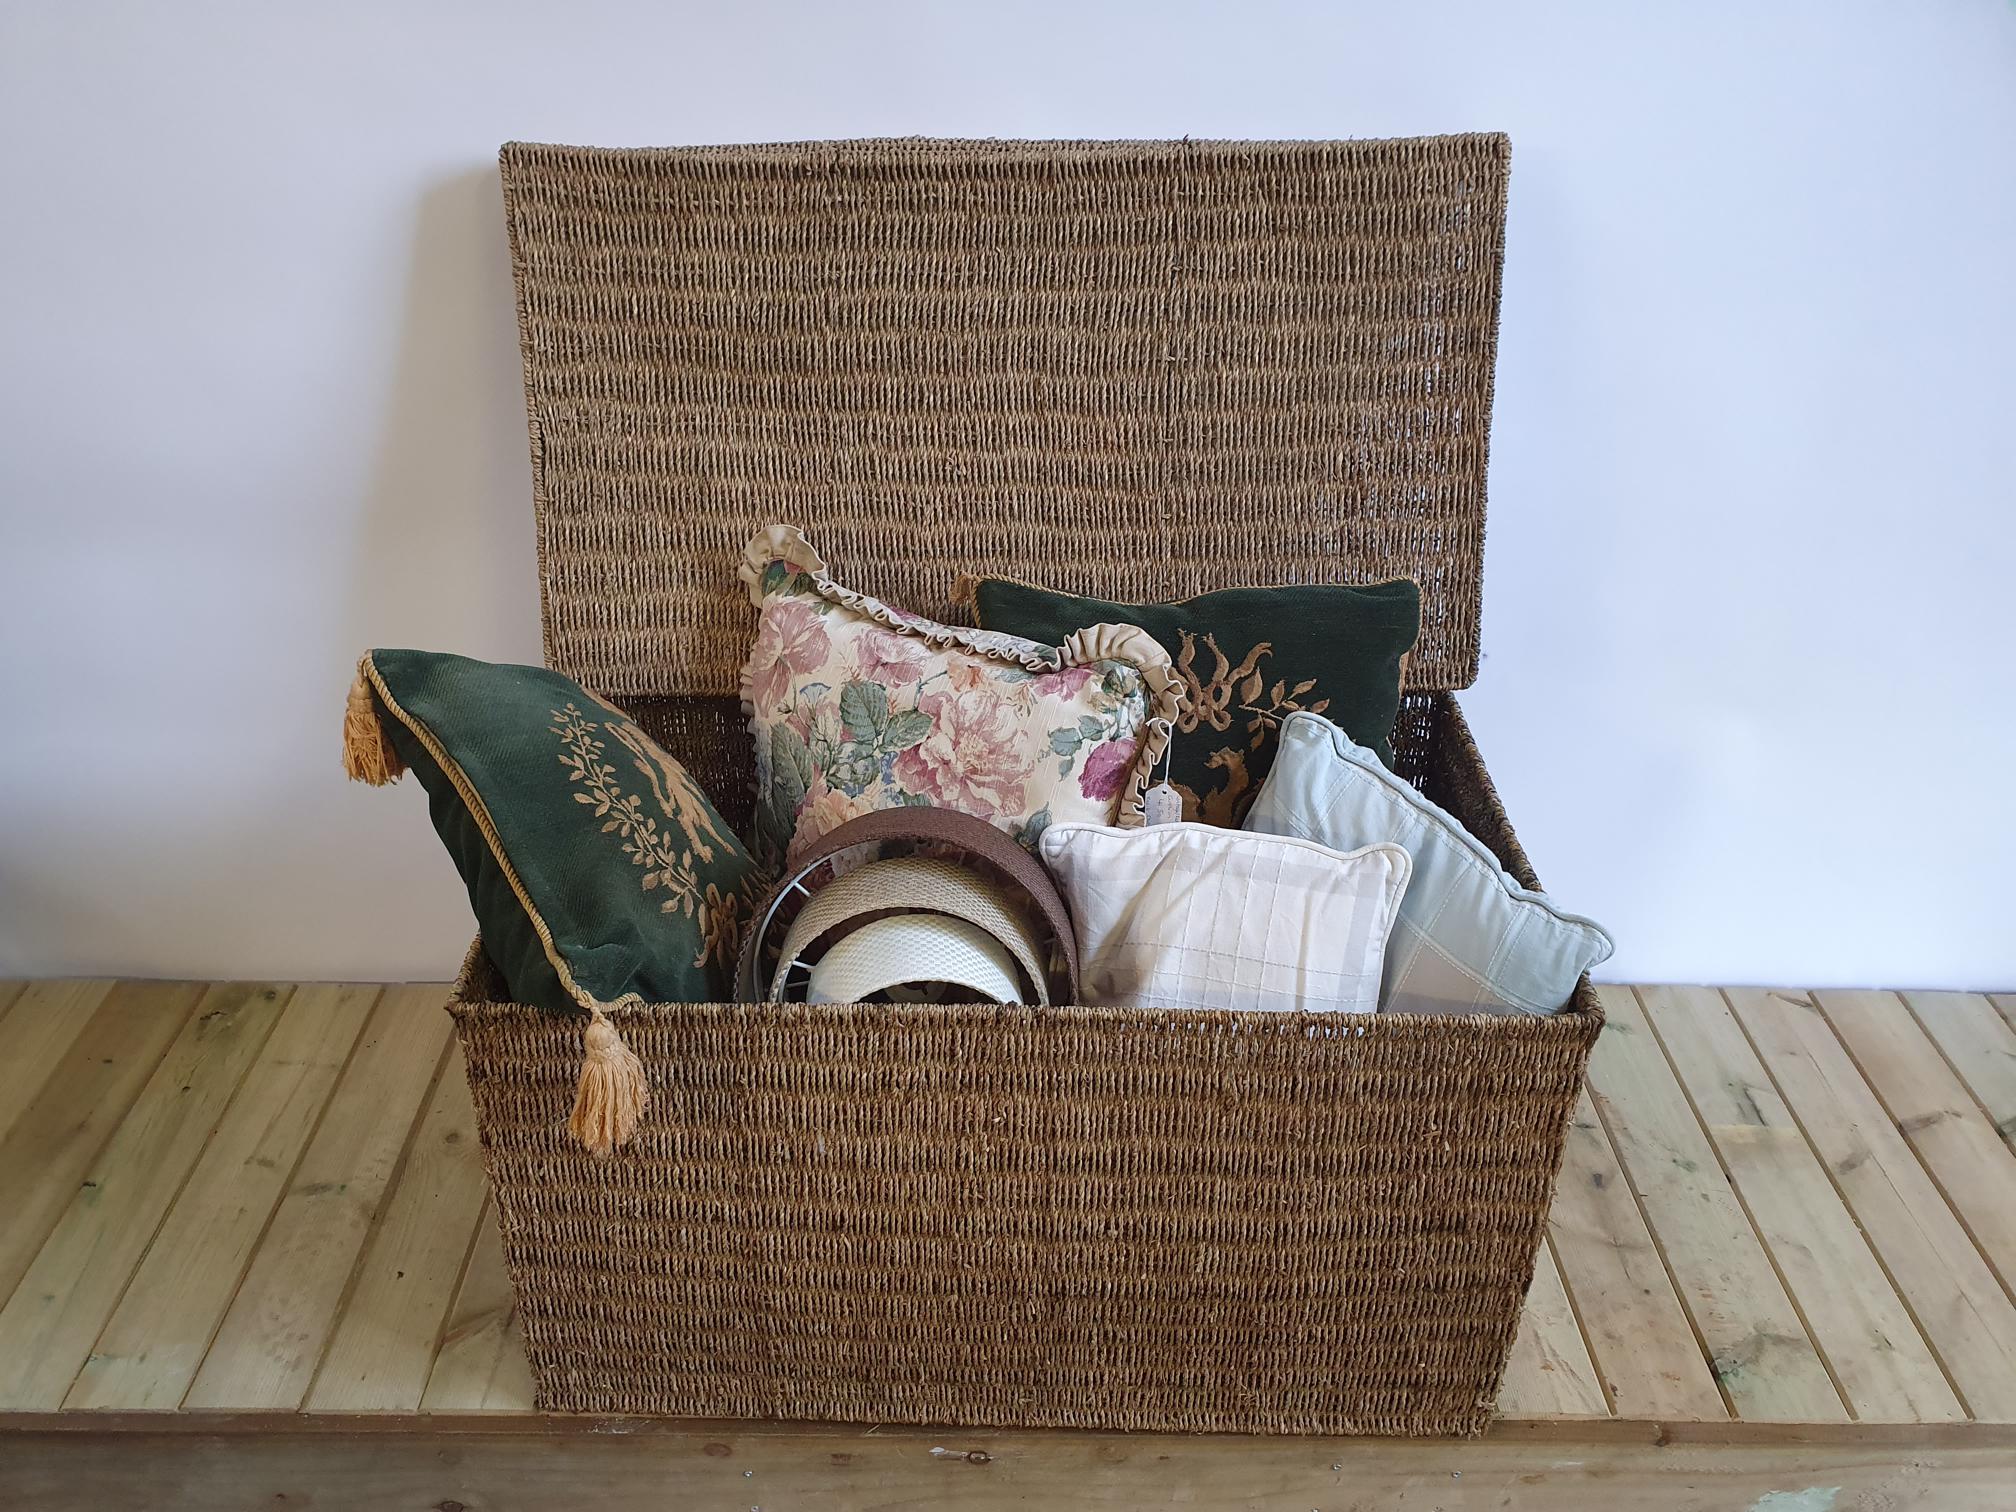 Wicker Basket and Contents